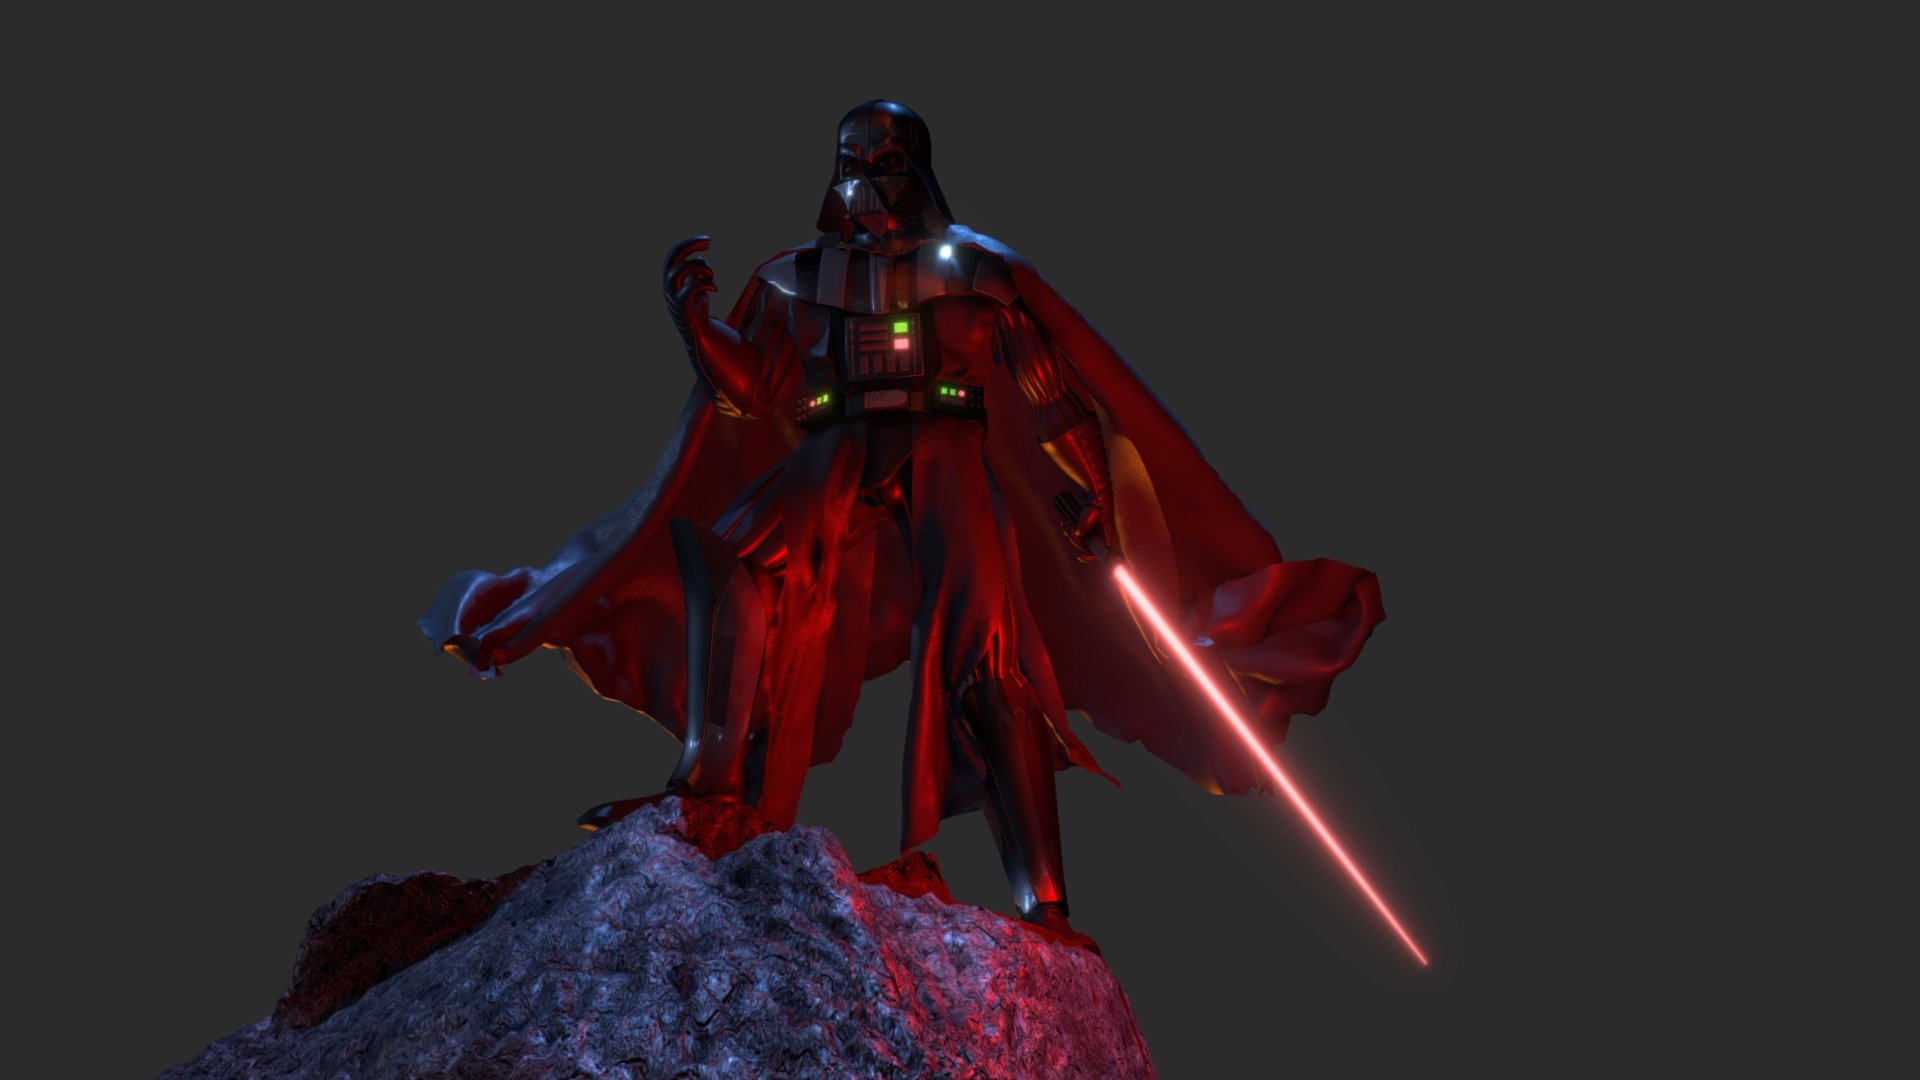 Terror of the rebel scum



made full in 3ds max and v-ray _ render and texturing - Vader - 3D model by PatricioConcha 3d model